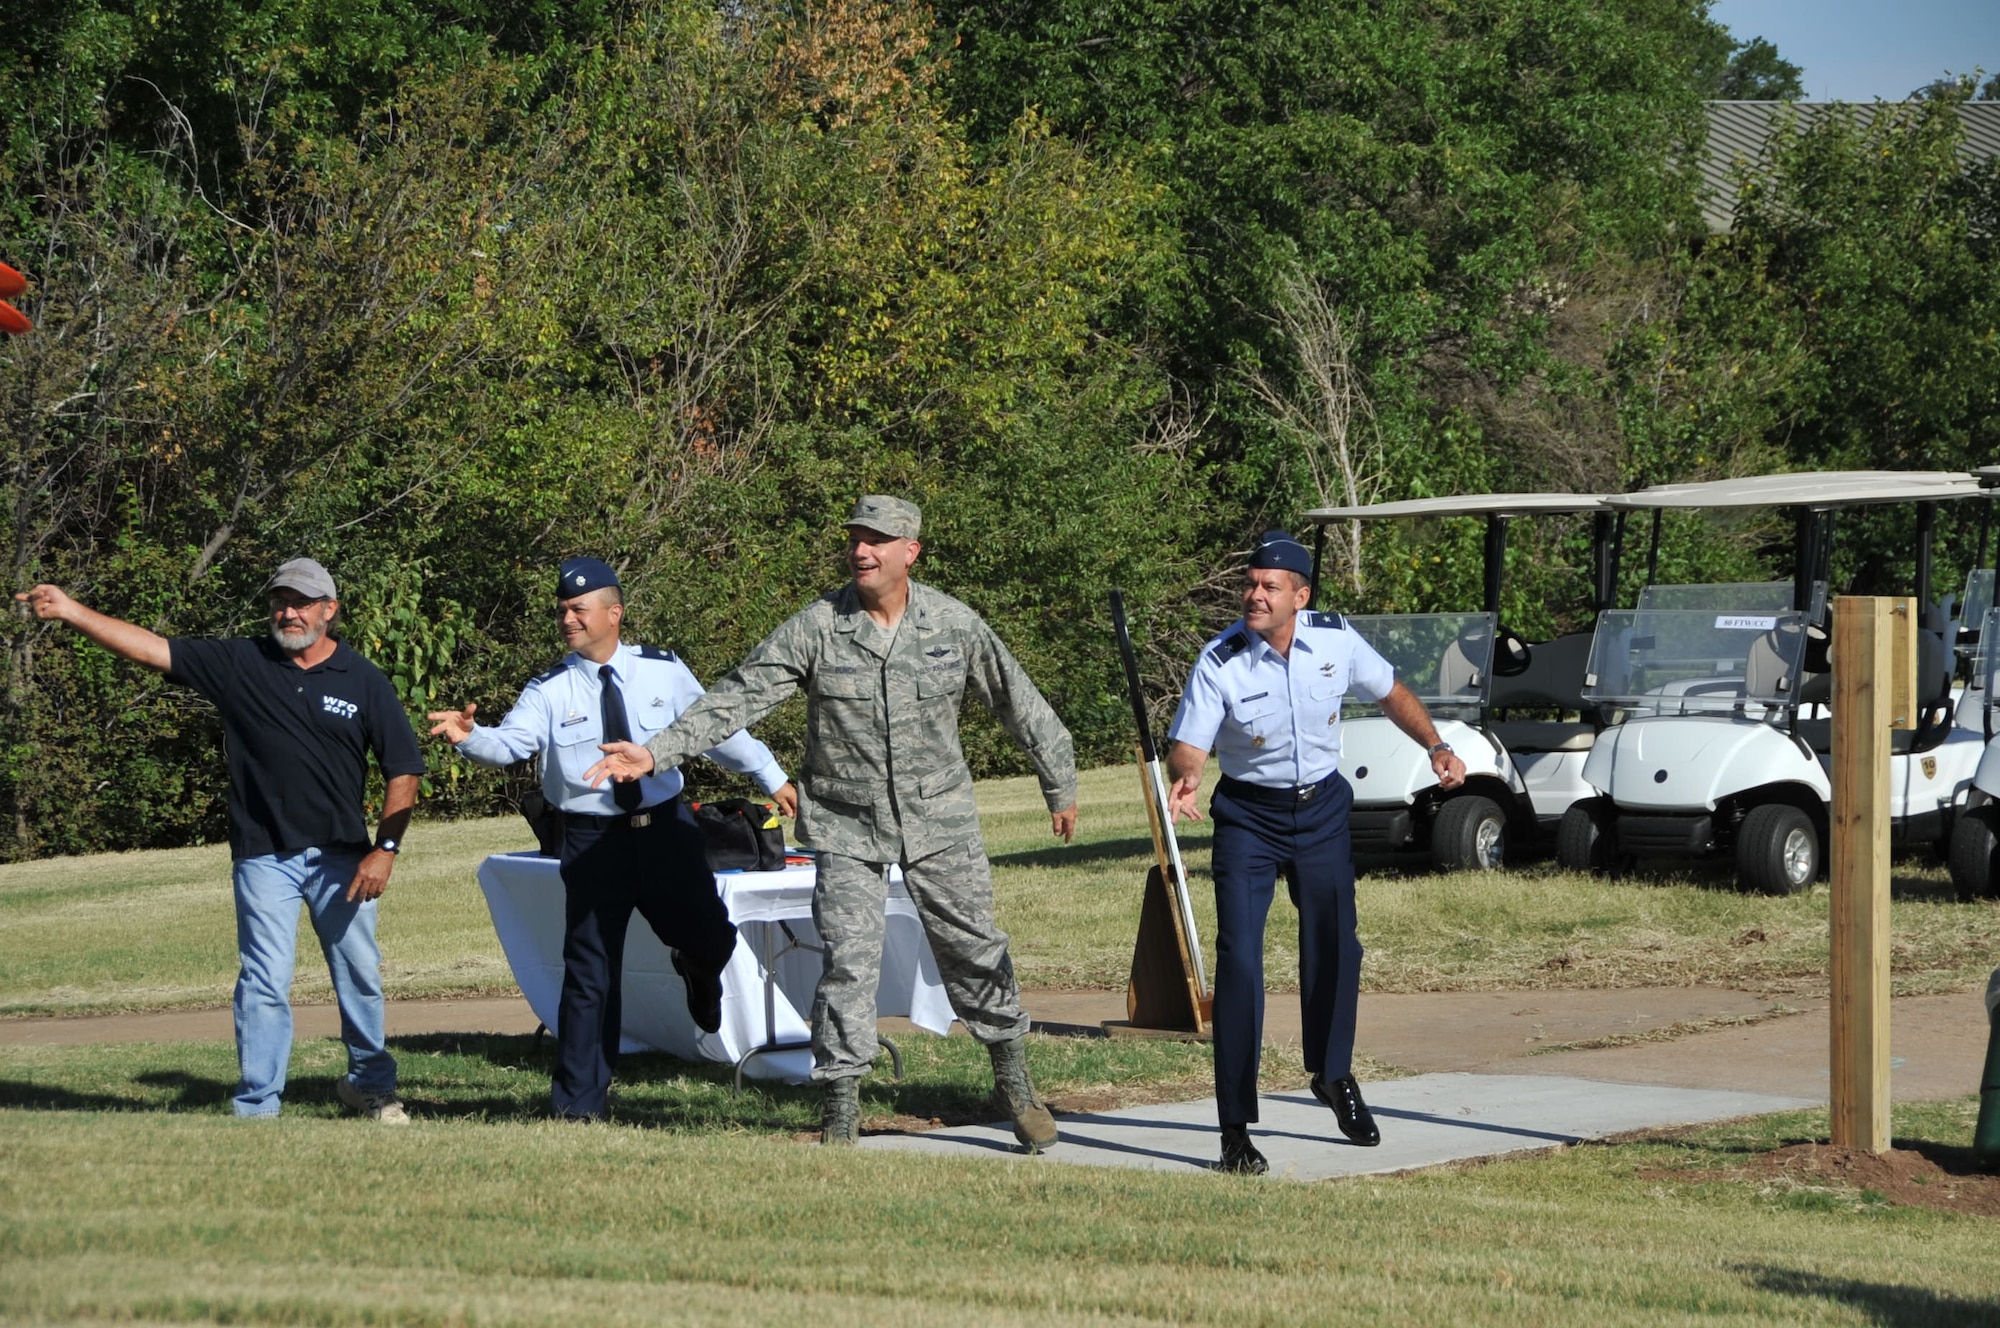 Jack Banks, president of the Wichita Falls Disc Golf Association, Brig. Gen. Scott Kindsvater, 82nd Training Wing commander, Col. Lance Bunch, 80th Flying Training Wing commander and Lt. Col. Joseph Chargualaf, 82nd Force Support Squadron commander, made the inaugural disc toss that opened the new disc golf course. Sheppard Air Force Base, Texas, is now home to a new 18-hole disc golf course, replacing the original golf course which closed in June due to a change in Defense Department policy. Sheppard partnered with the Wichita Falls Disc Golf Association to complete the project. (U.S. Air Force photo/Airman 1st Class Robert L. McIlrath)